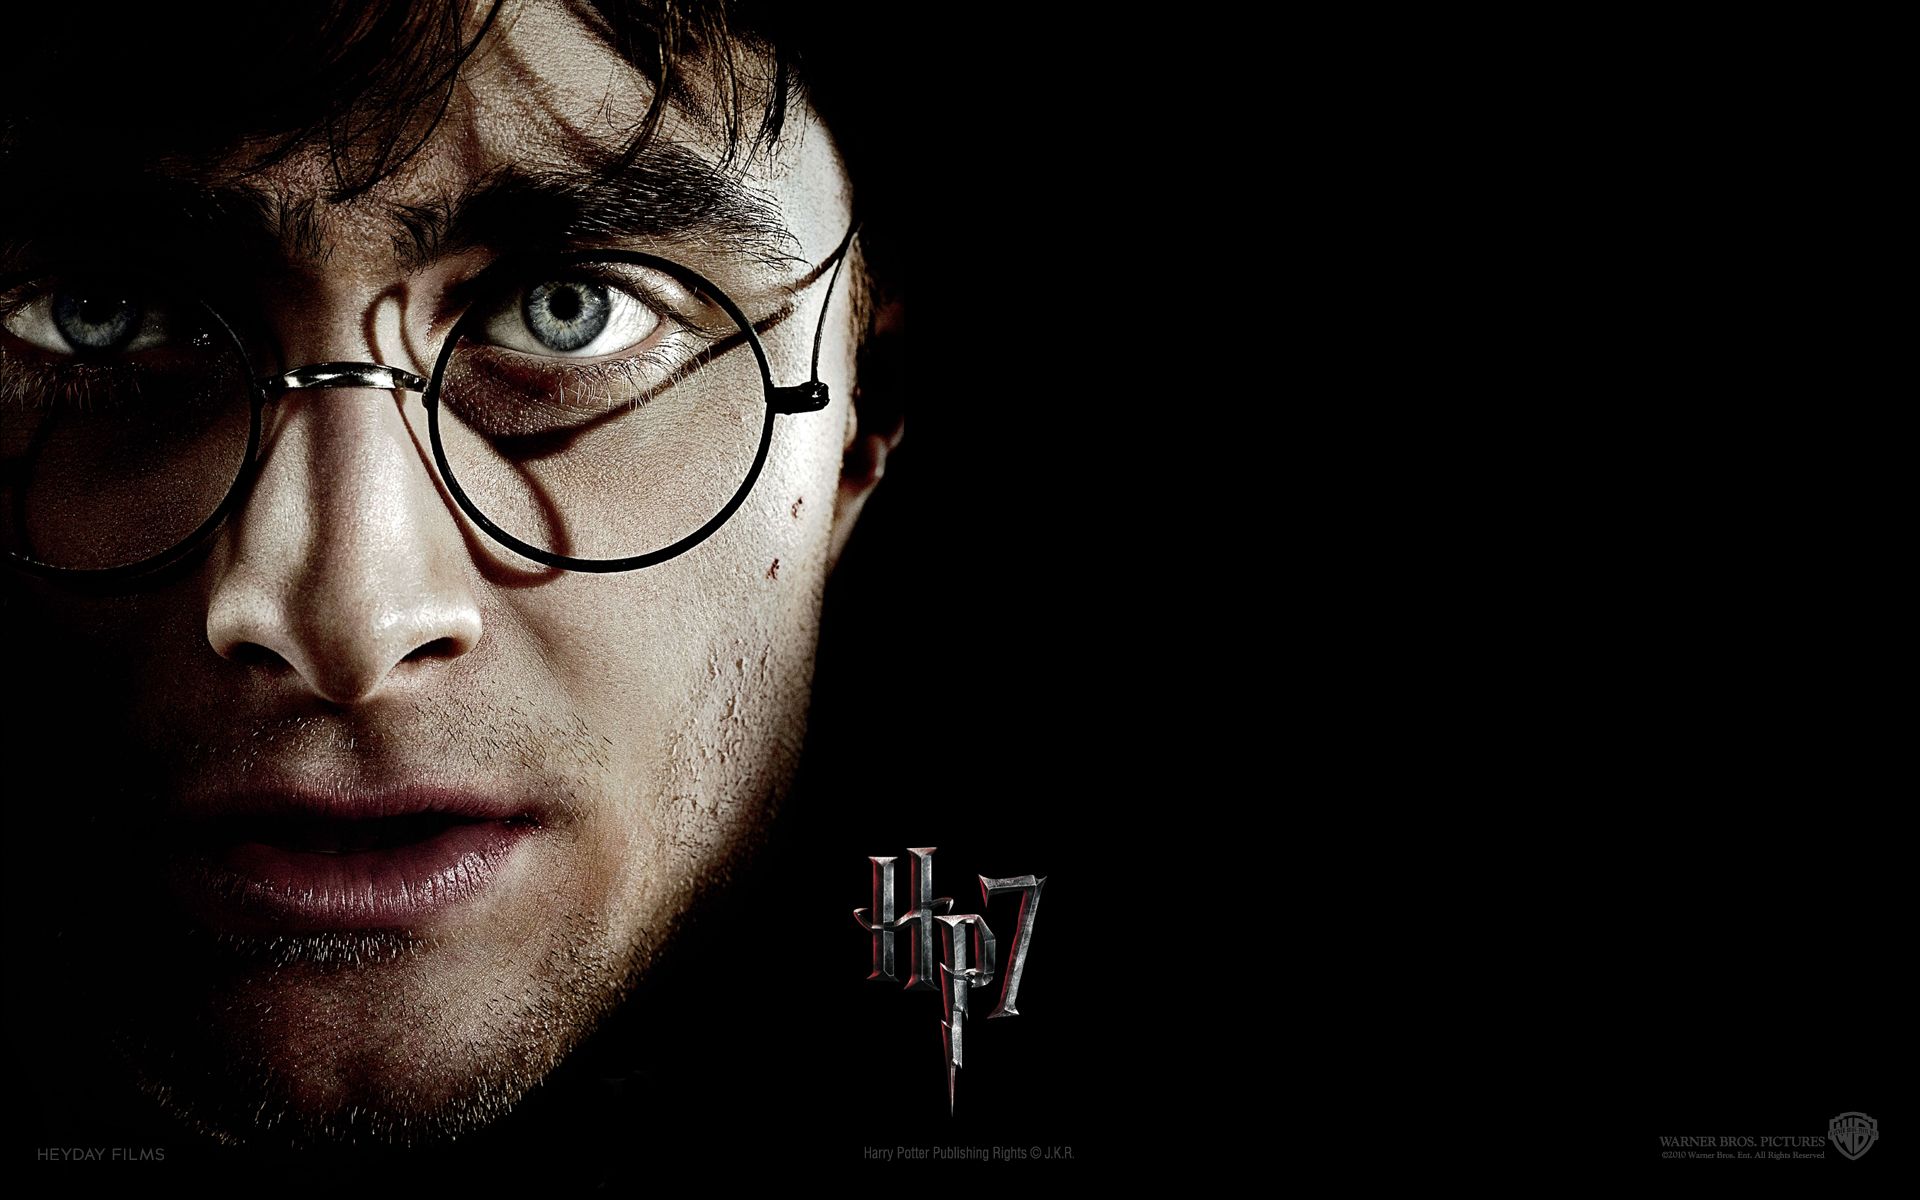 Harry Potter And The Deathly Hallows Part 2 wallpaper. Harry potter quiz, Harry potter image, Harry potter movies